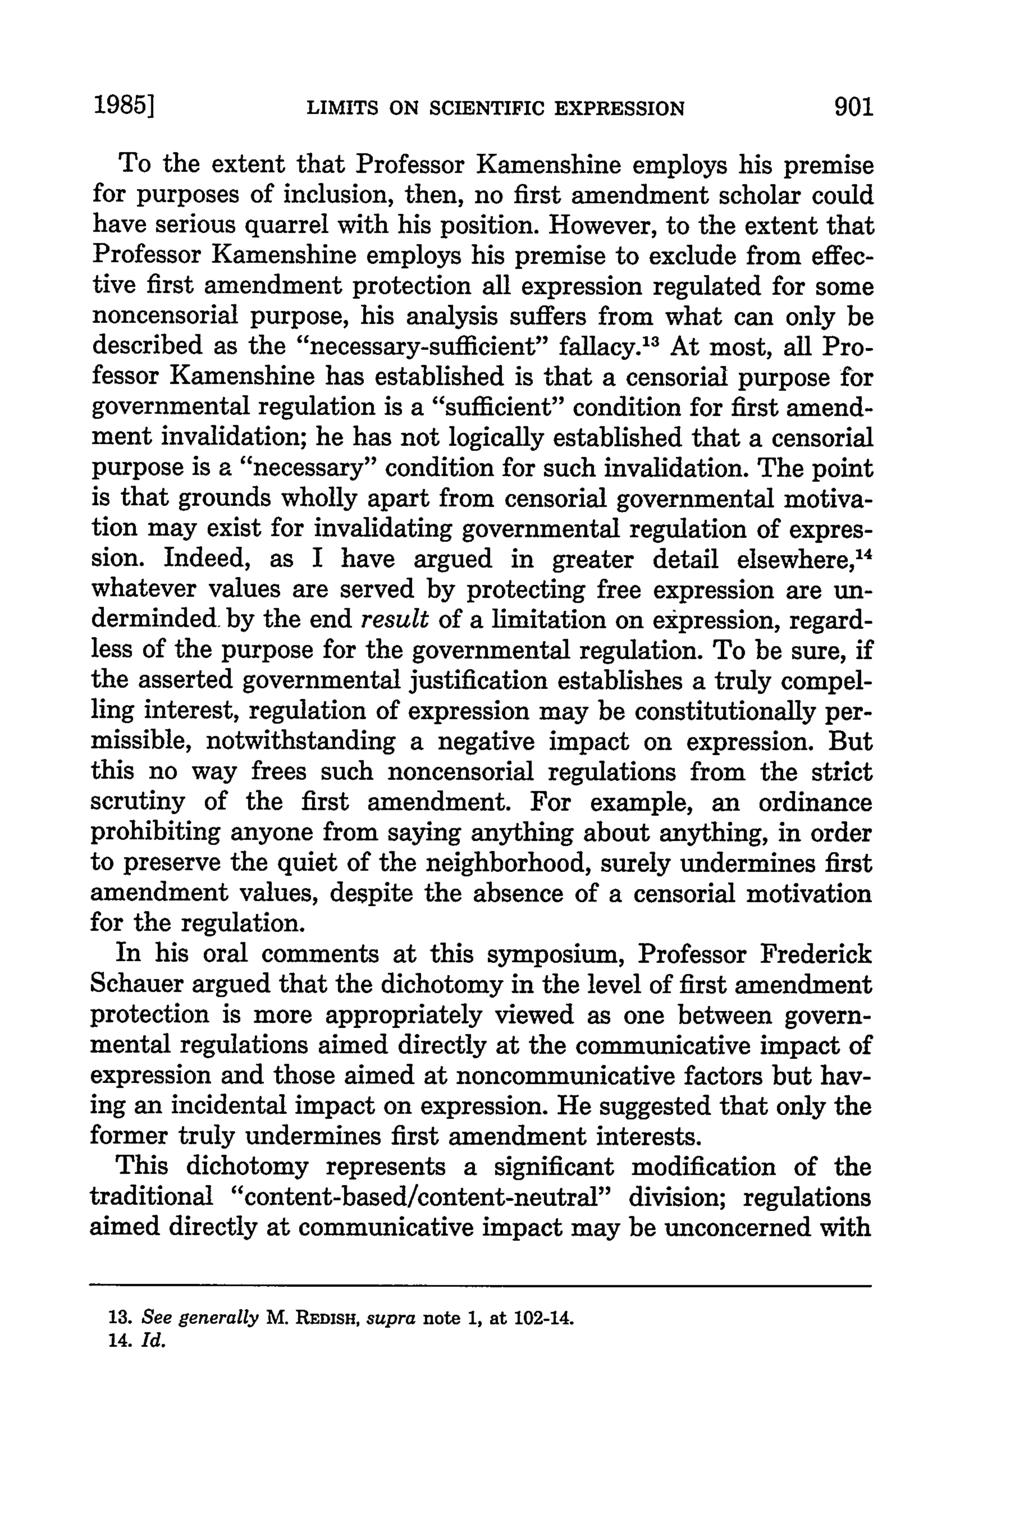 1985] LIMITS ON SCIENTIFIC EXPRESSION To the extent that Professor Kamenshine employs his premise for purposes of inclusion, then, no first amendment scholar could have serious quarrel with his